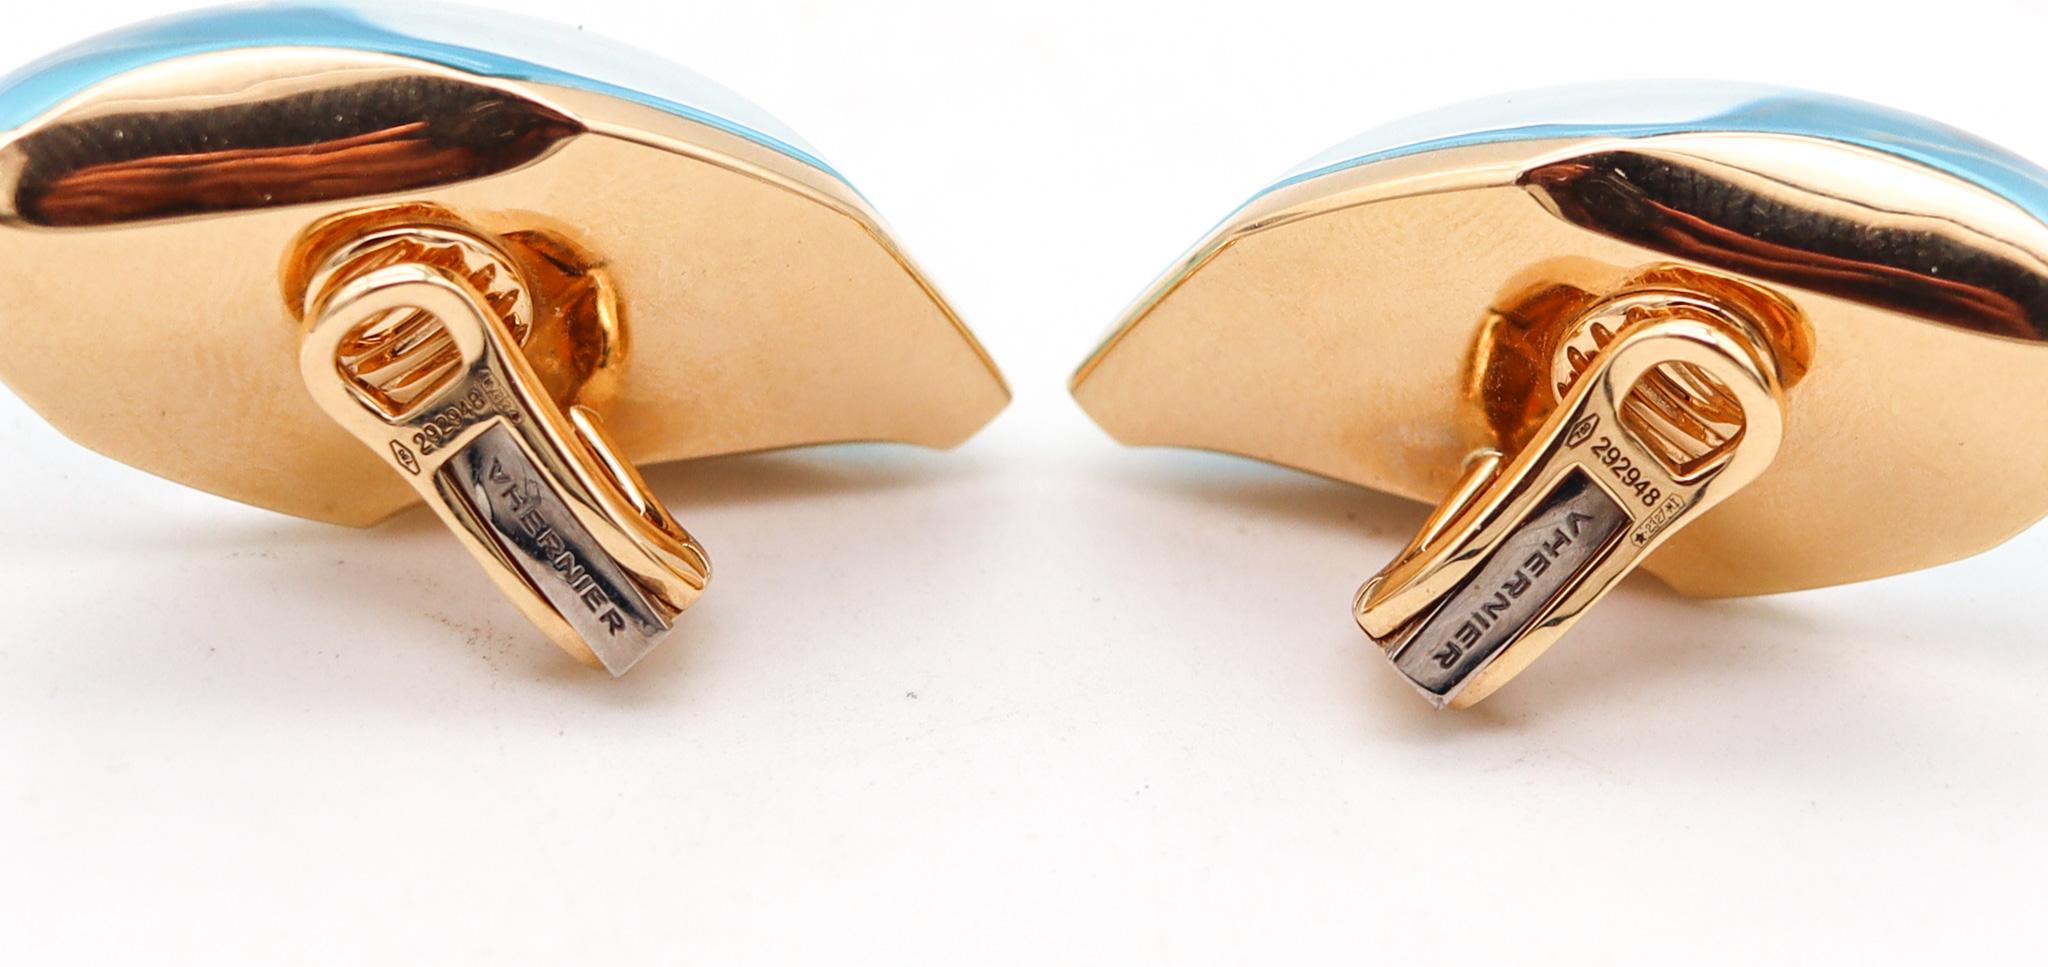 Cabochon Vhernier Milano Aladino Clip On Earrings In 18Kt Yellow Gold With Blue Quartz